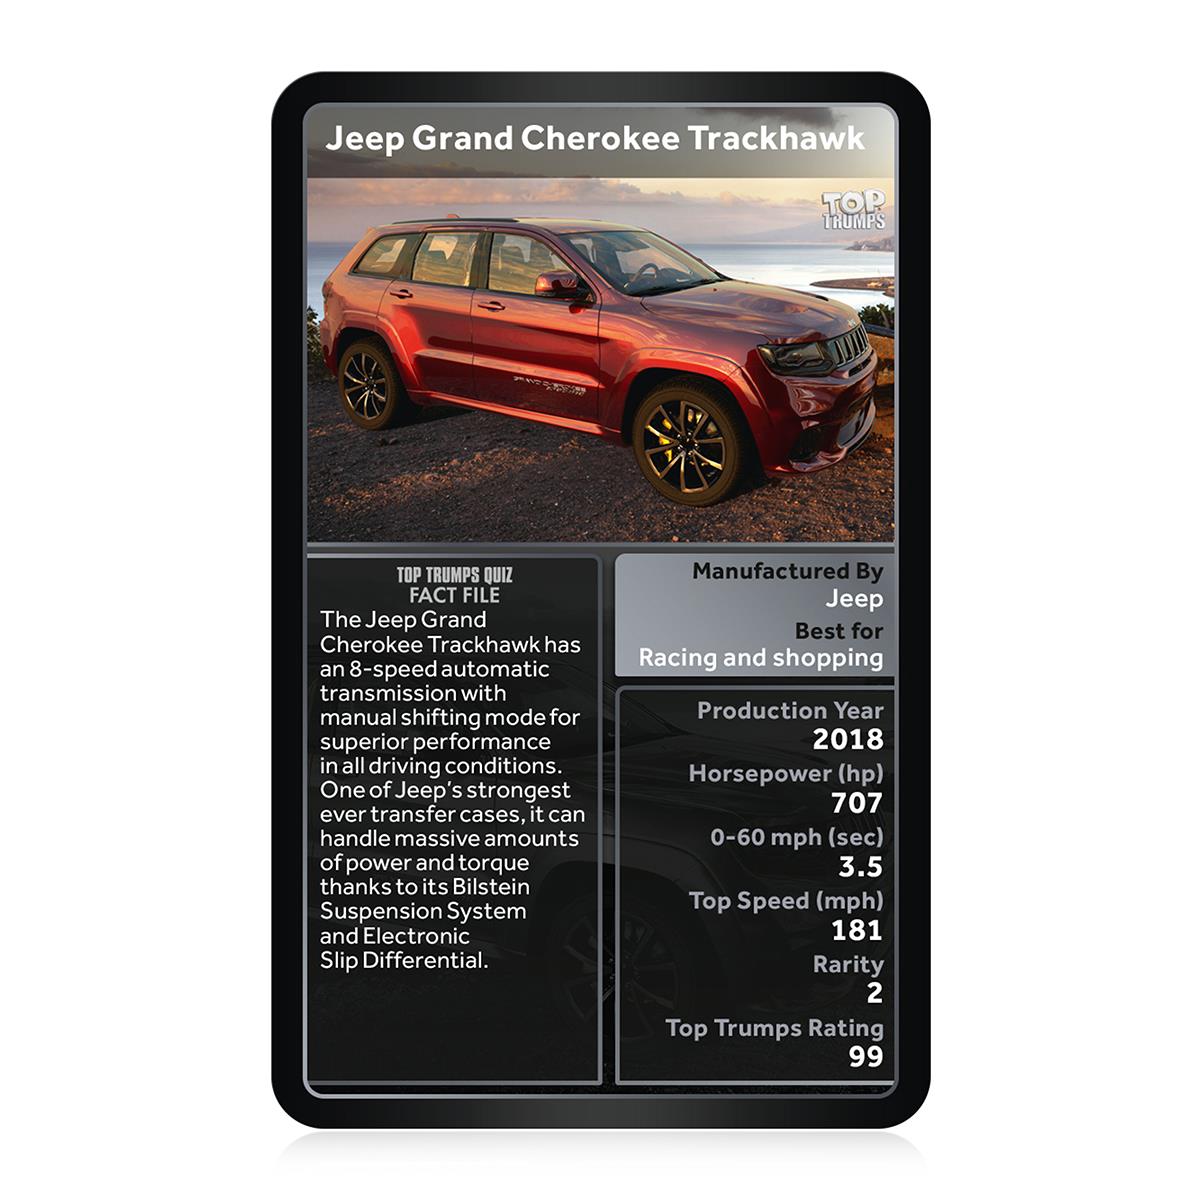 Ultimate 4x4 Vehicles Top Trumps Card Game